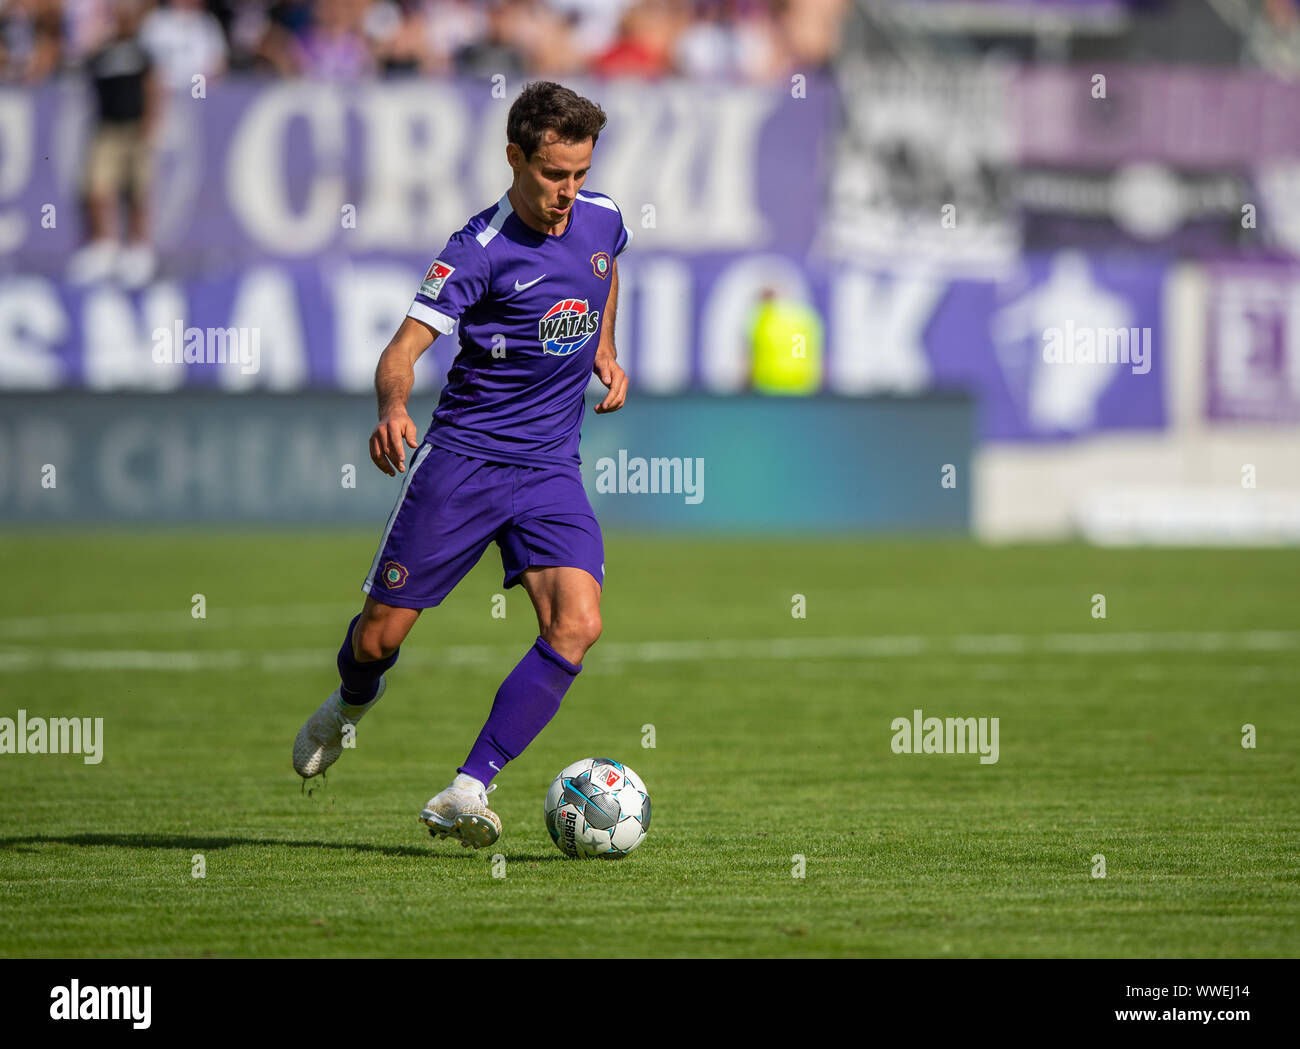 Aue, Germany. 15th Sep, 2019. Soccer: 2nd Bundesliga, Erzgebirge Aue - VfL Osnabrück, 6th matchday, in the Sparkassen-Erzgebirgsstadion. Clemens Fandrich plays the ball. Credit: Robert Michael/dpa-Zentralbild/dpa - IMPORTANT NOTE: In accordance with the requirements of the DFL Deutsche Fußball Liga or the DFB Deutscher Fußball-Bund, it is prohibited to use or have used photographs taken in the stadium and/or the match in the form of sequence images and/or video-like photo sequences./dpa/Alamy Live News Stock Photo